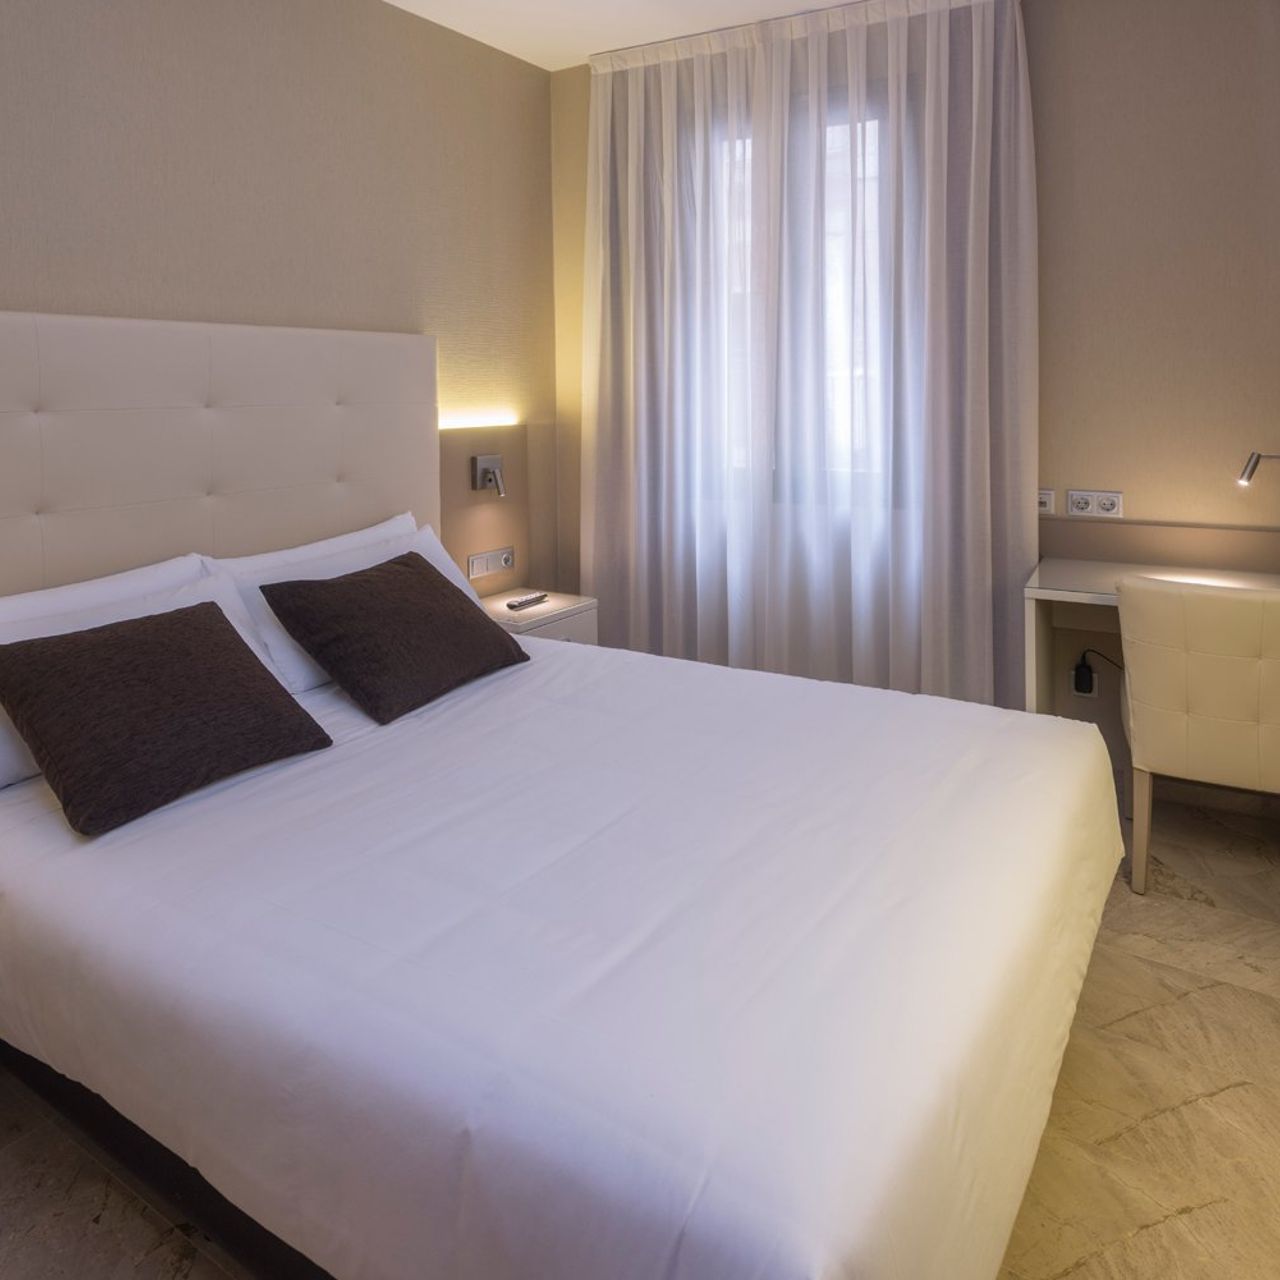 Hotel Serhs del Port - Barcelona - Great prices at HOTEL INFO